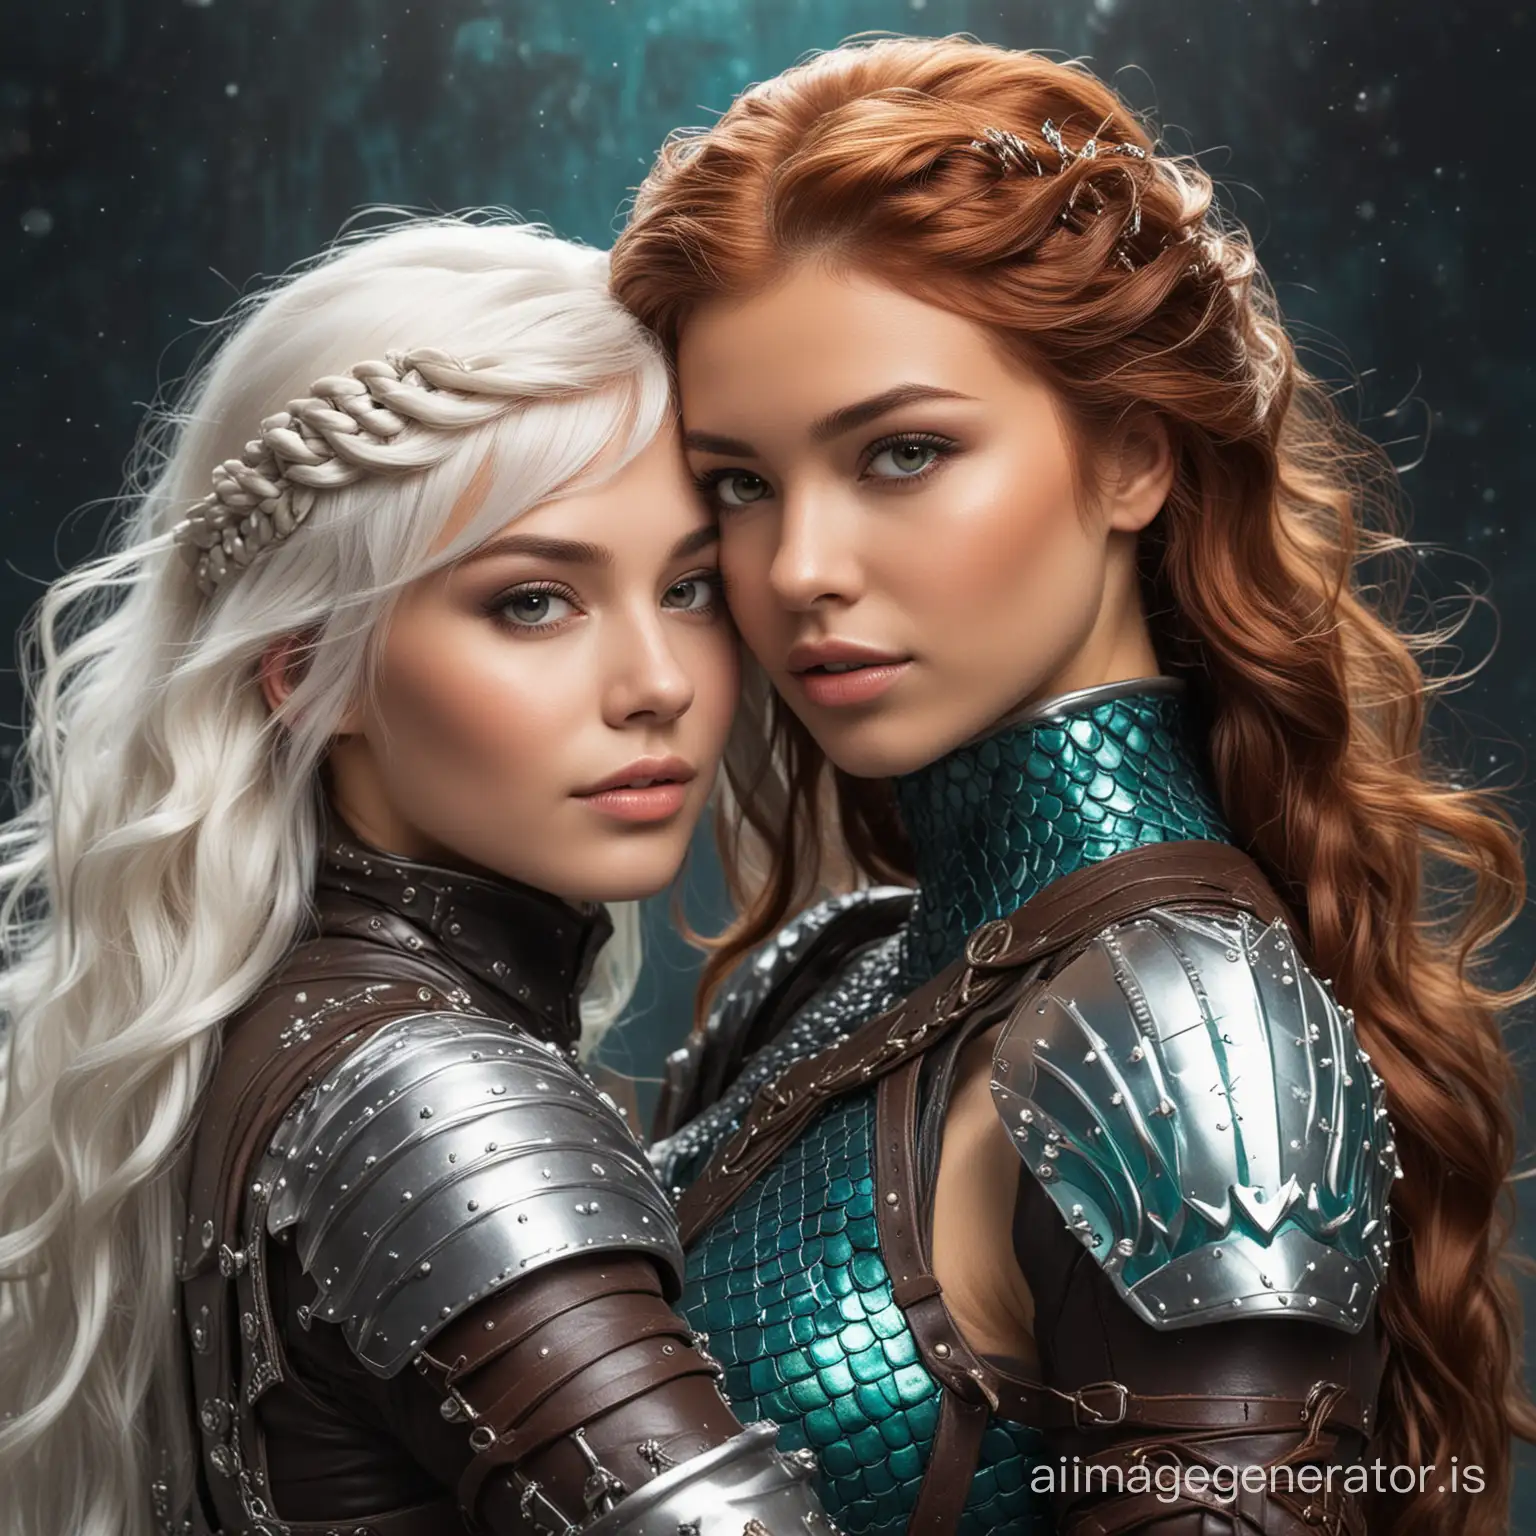 Eskimo Princess in leather armor with pixie cut and mermaid with flowing long hair embrace